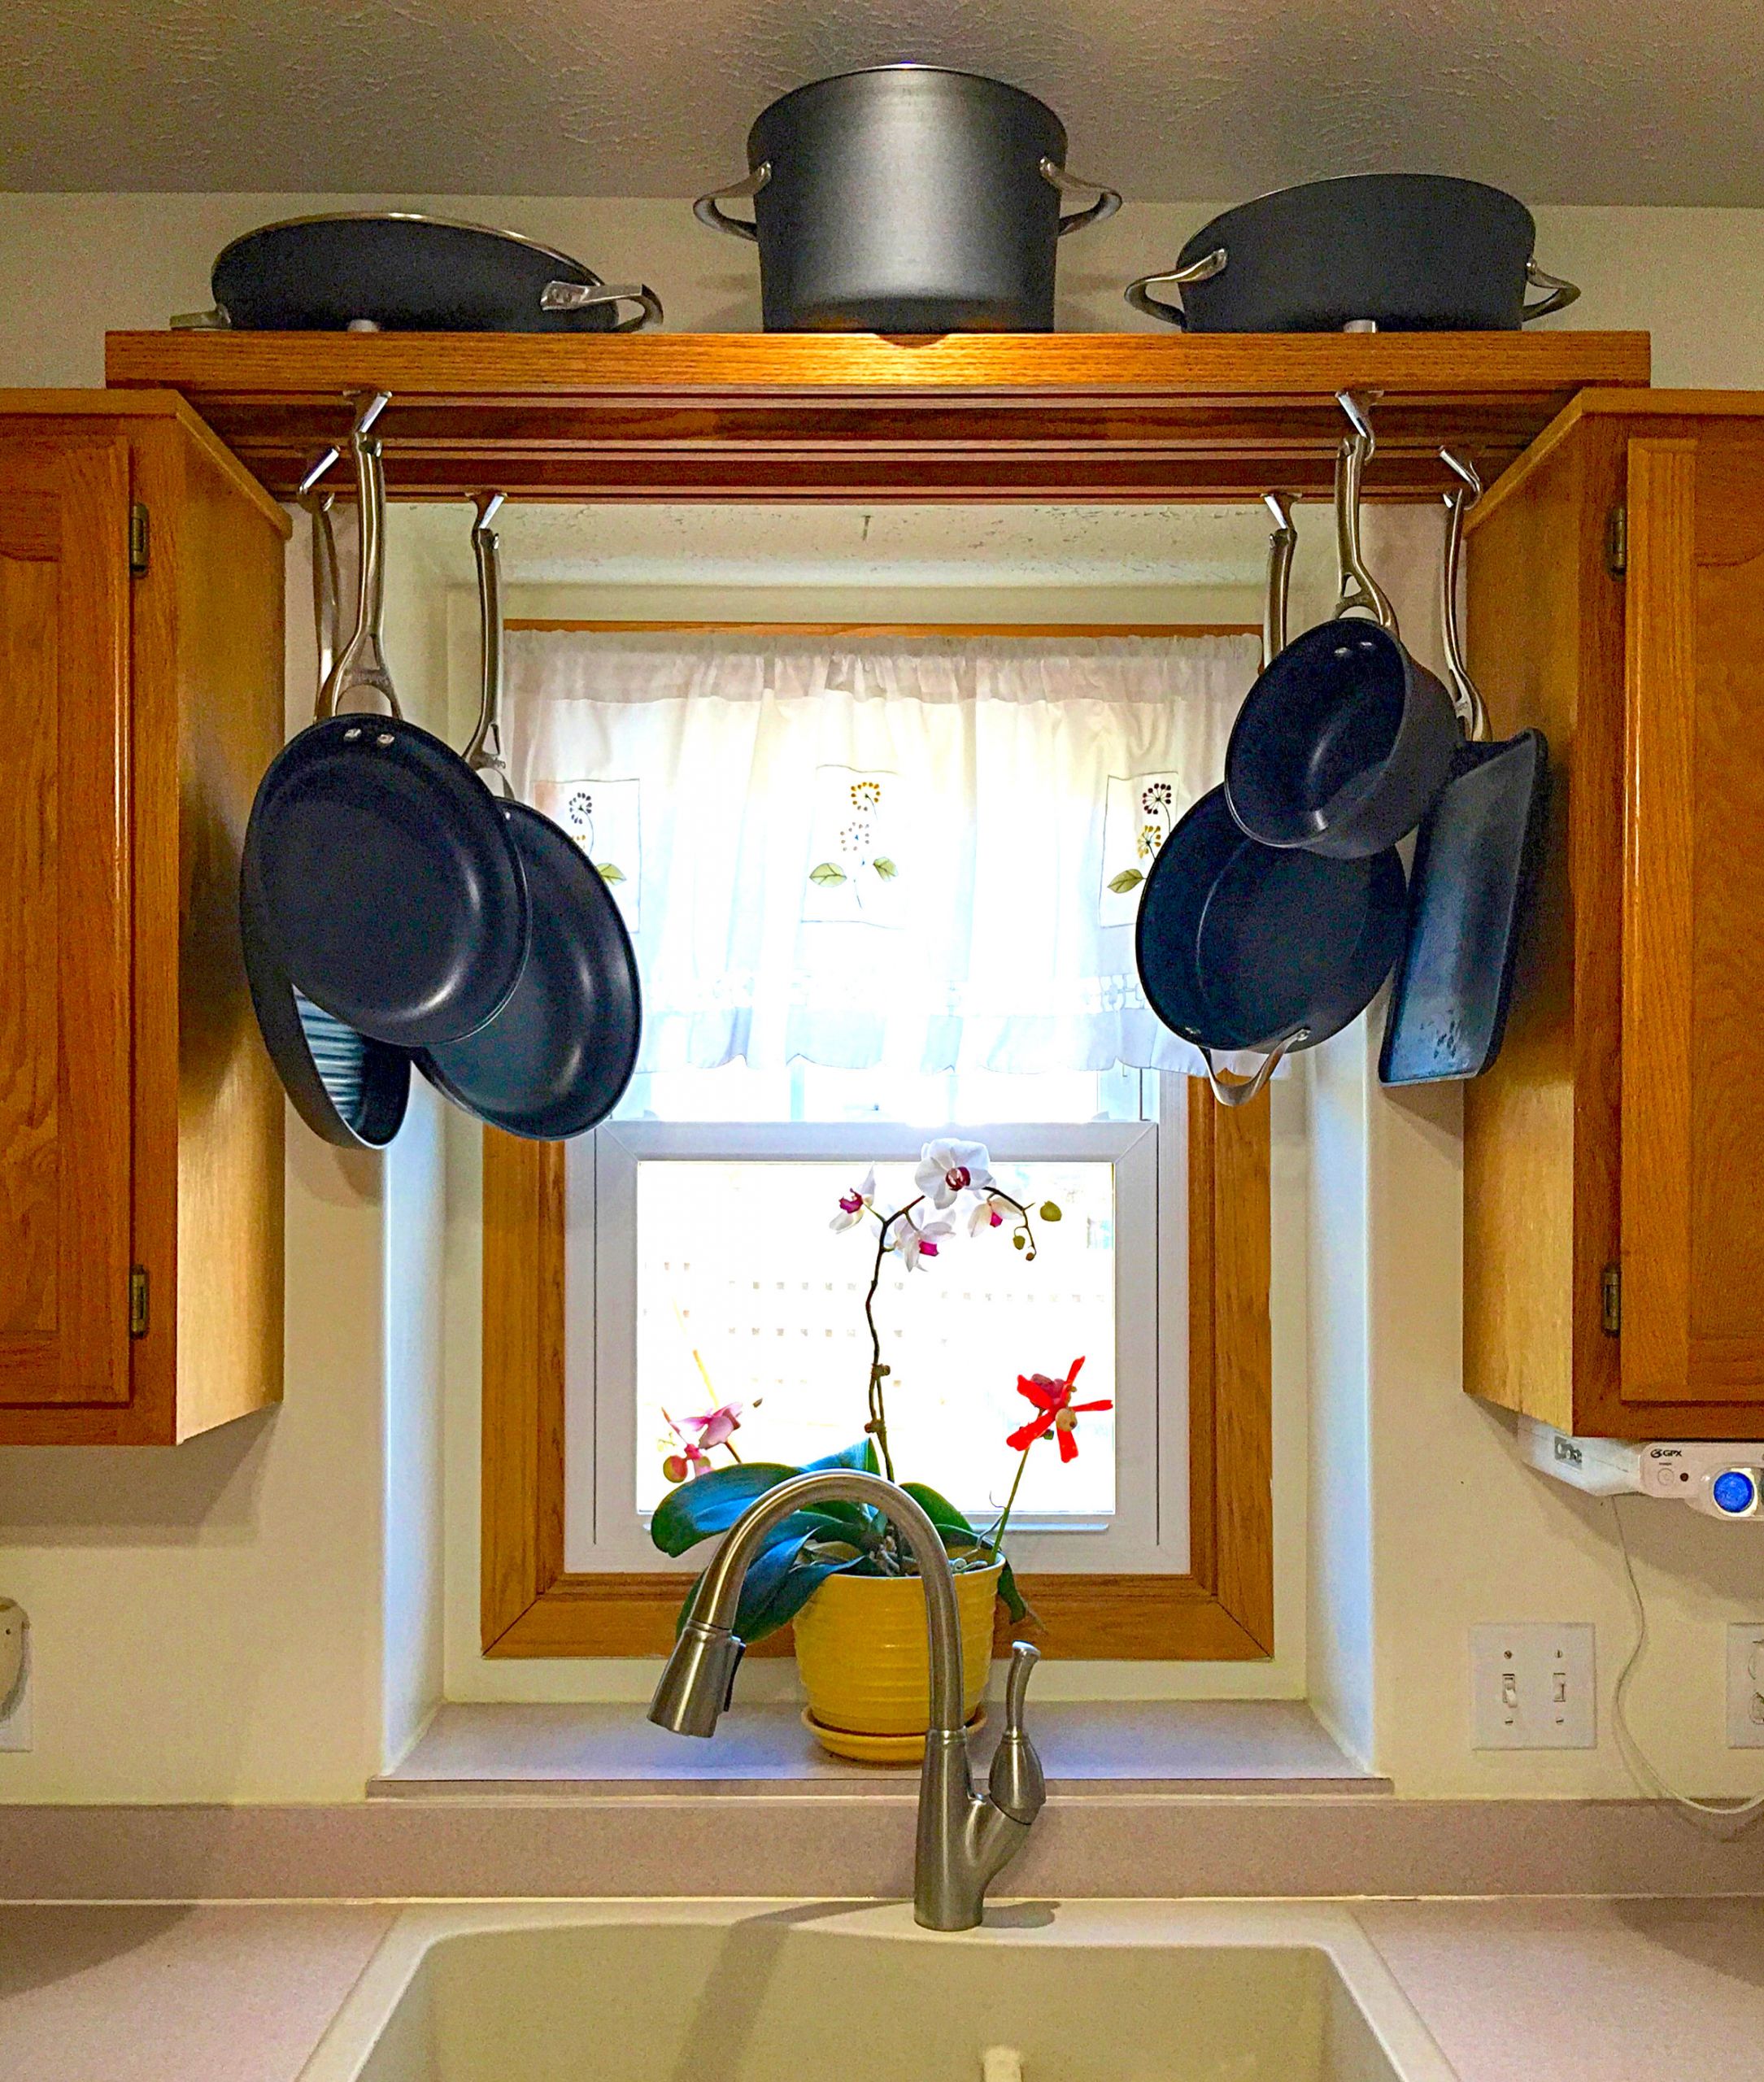 DIY Wall Mounted Pot Rack
 Make use of space over the kitchen sink with this DIY pot